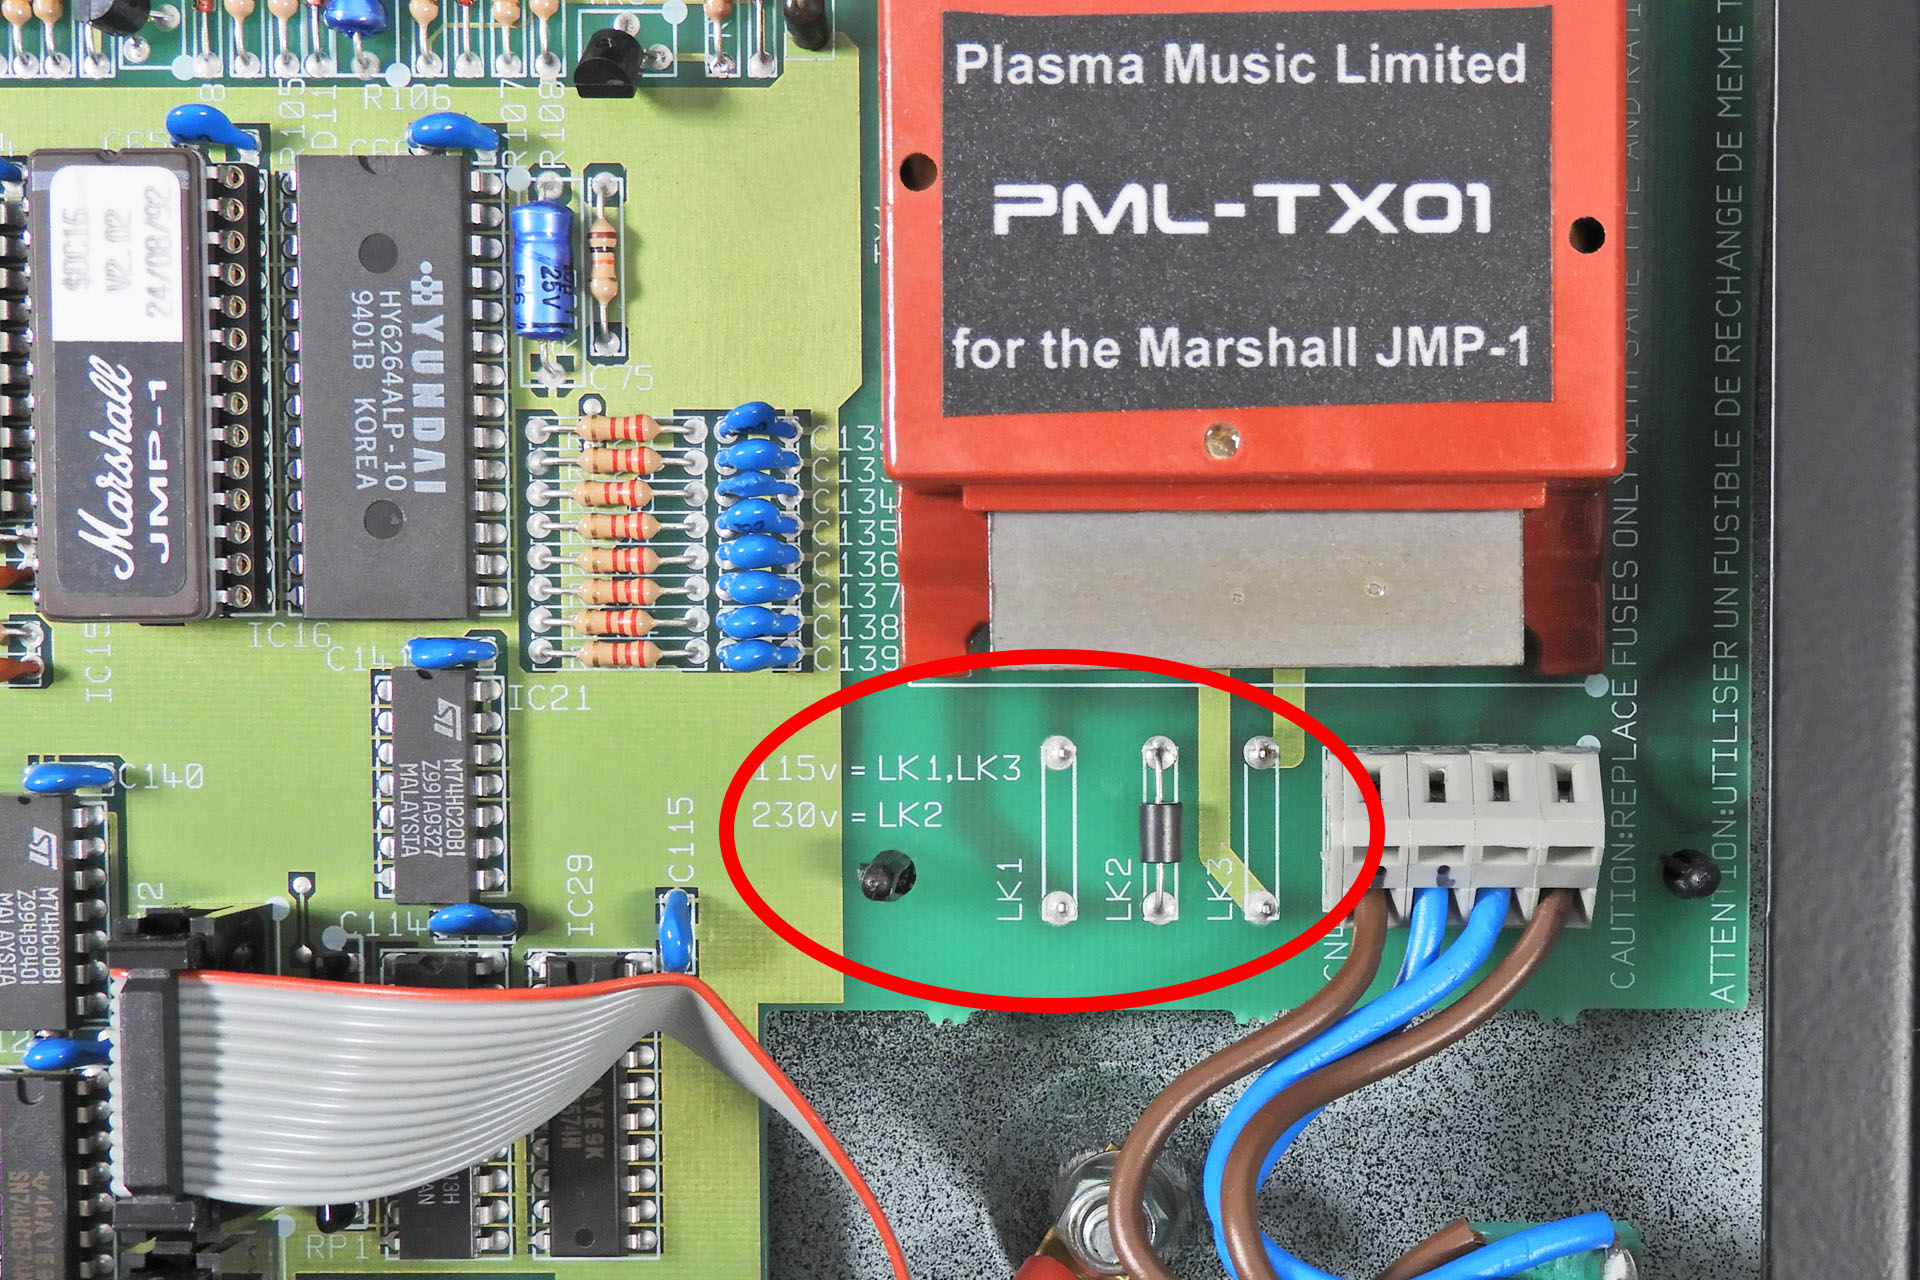 PML-TX01 replacement transformer for the Marshall JMP-1